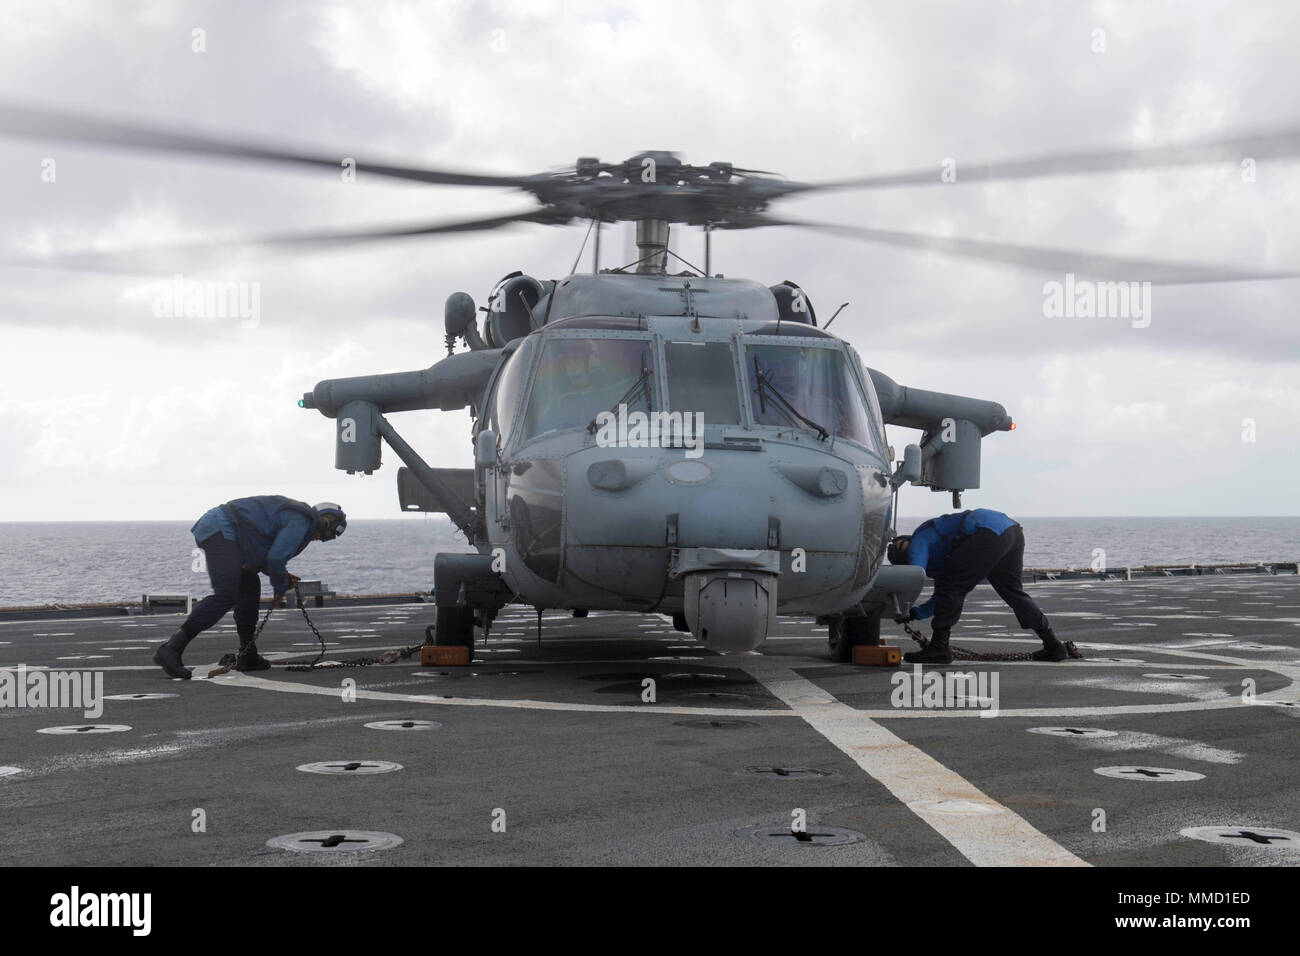 171015-N-DQ503-052 CARIBBEAN SEA (Oct. 15, 2017) Sailors chock and chain an MH60S Seahawk helicopter on the flight deck of the dock landing ship USS Oak Hill (LSD 51). The Department of Defense is supporting Federal Emergency Management Agency, the lead federal agency, in helping those affected by Hurricane Maria to minimize suffering and is one component of the overall whole-of-government response effort. (U.S. Navy photo by Mass Communication Specialist 3rd Class Taylor A. Elberg) Stock Photo